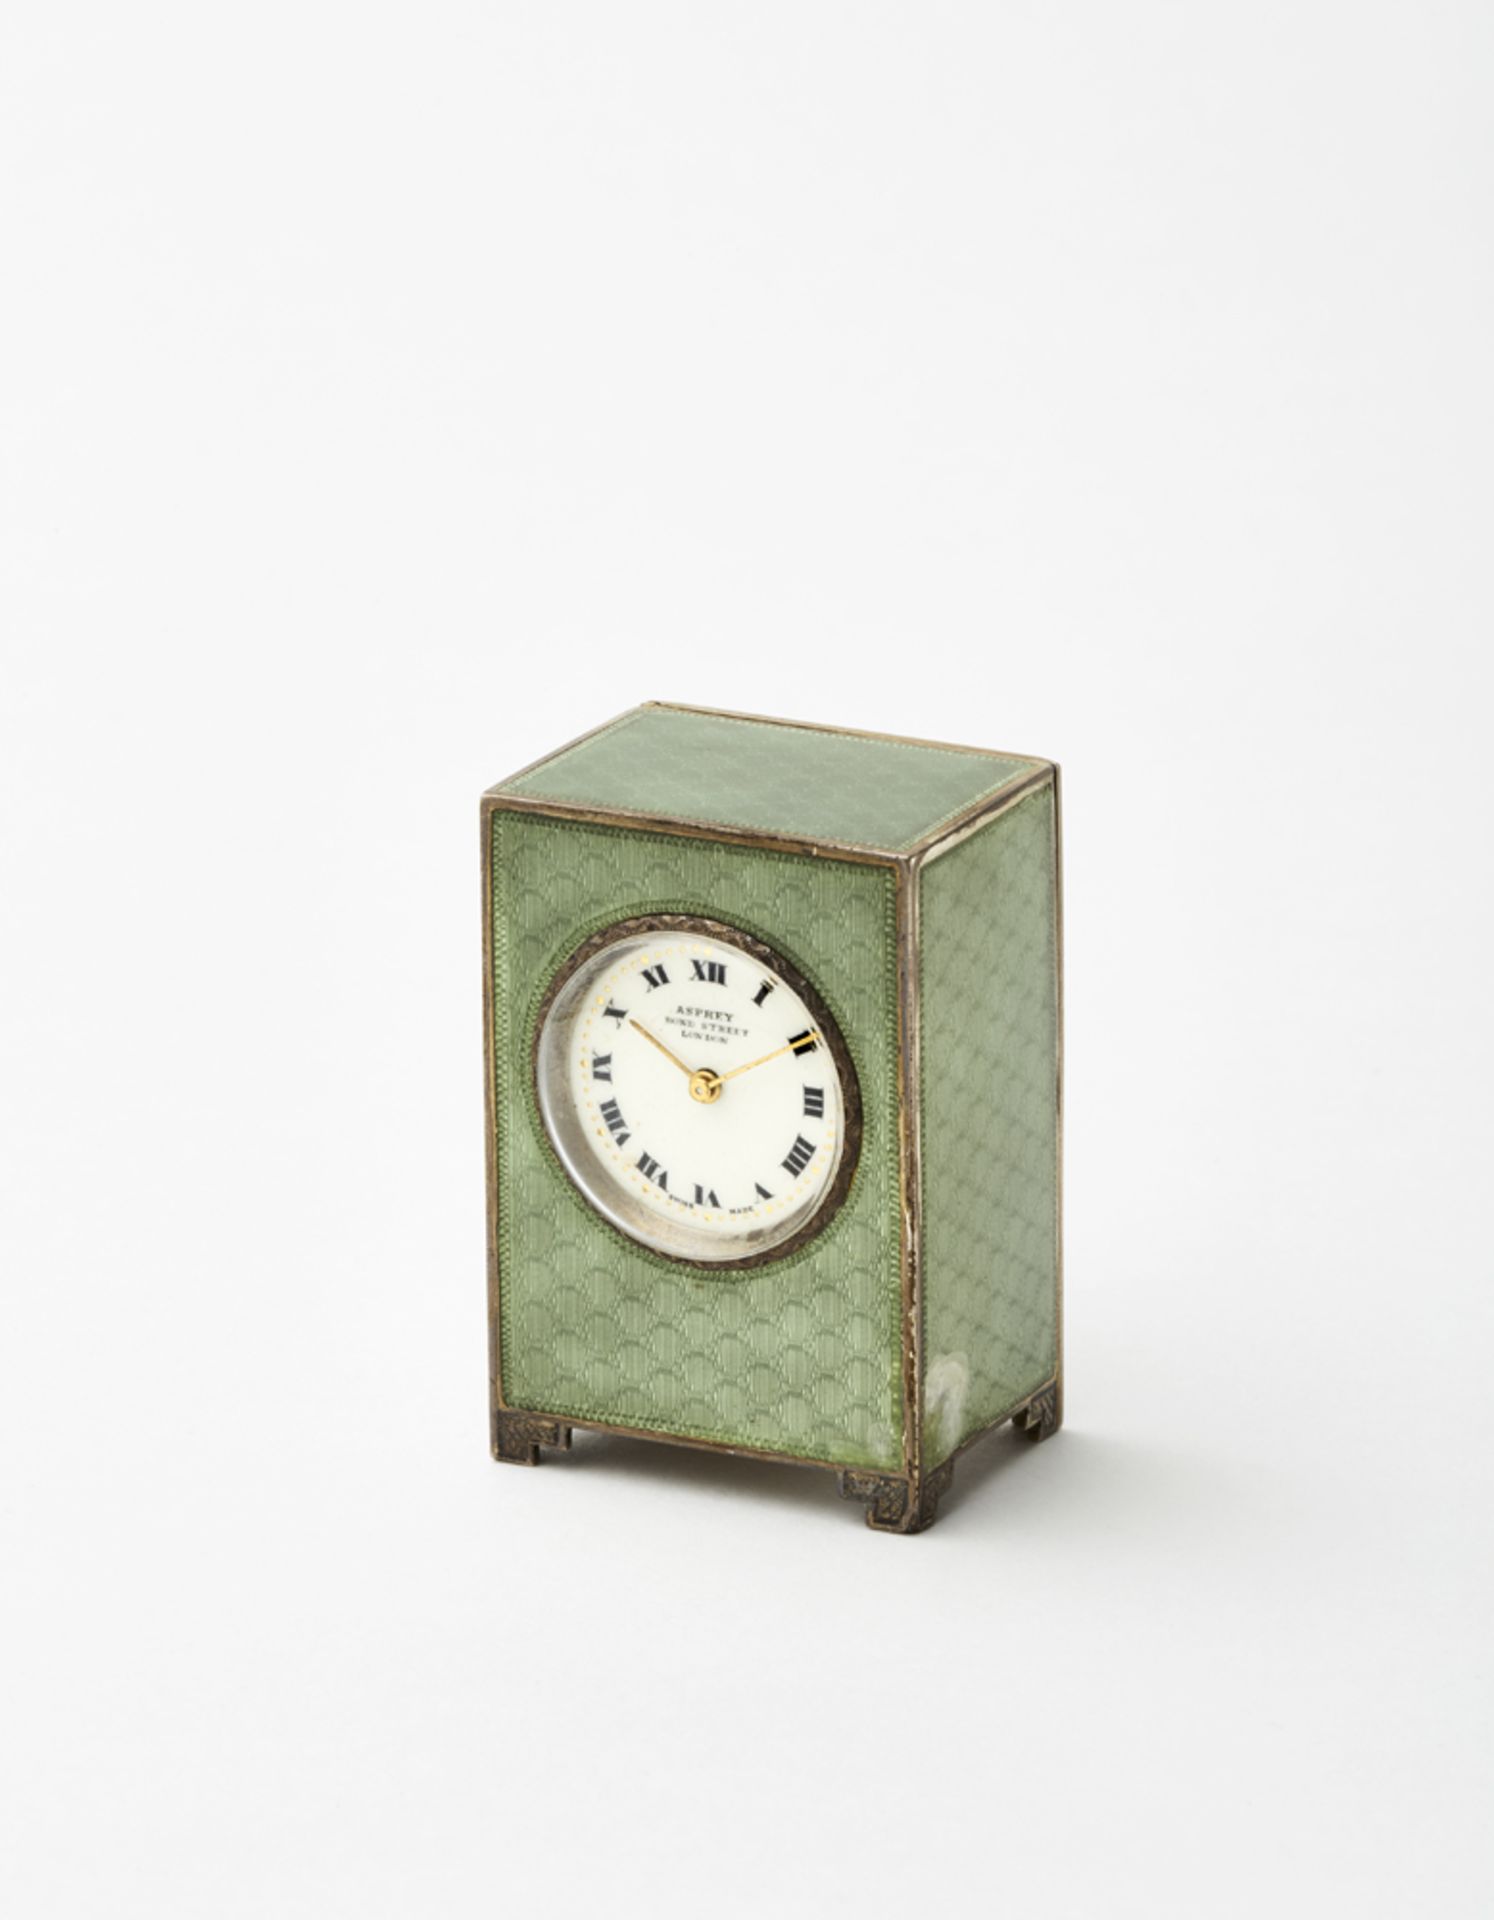 ASPREYSmall silver and guillochÃ© enamel table clock.White dial with Roman numerals signed "Asprey - Image 2 of 4